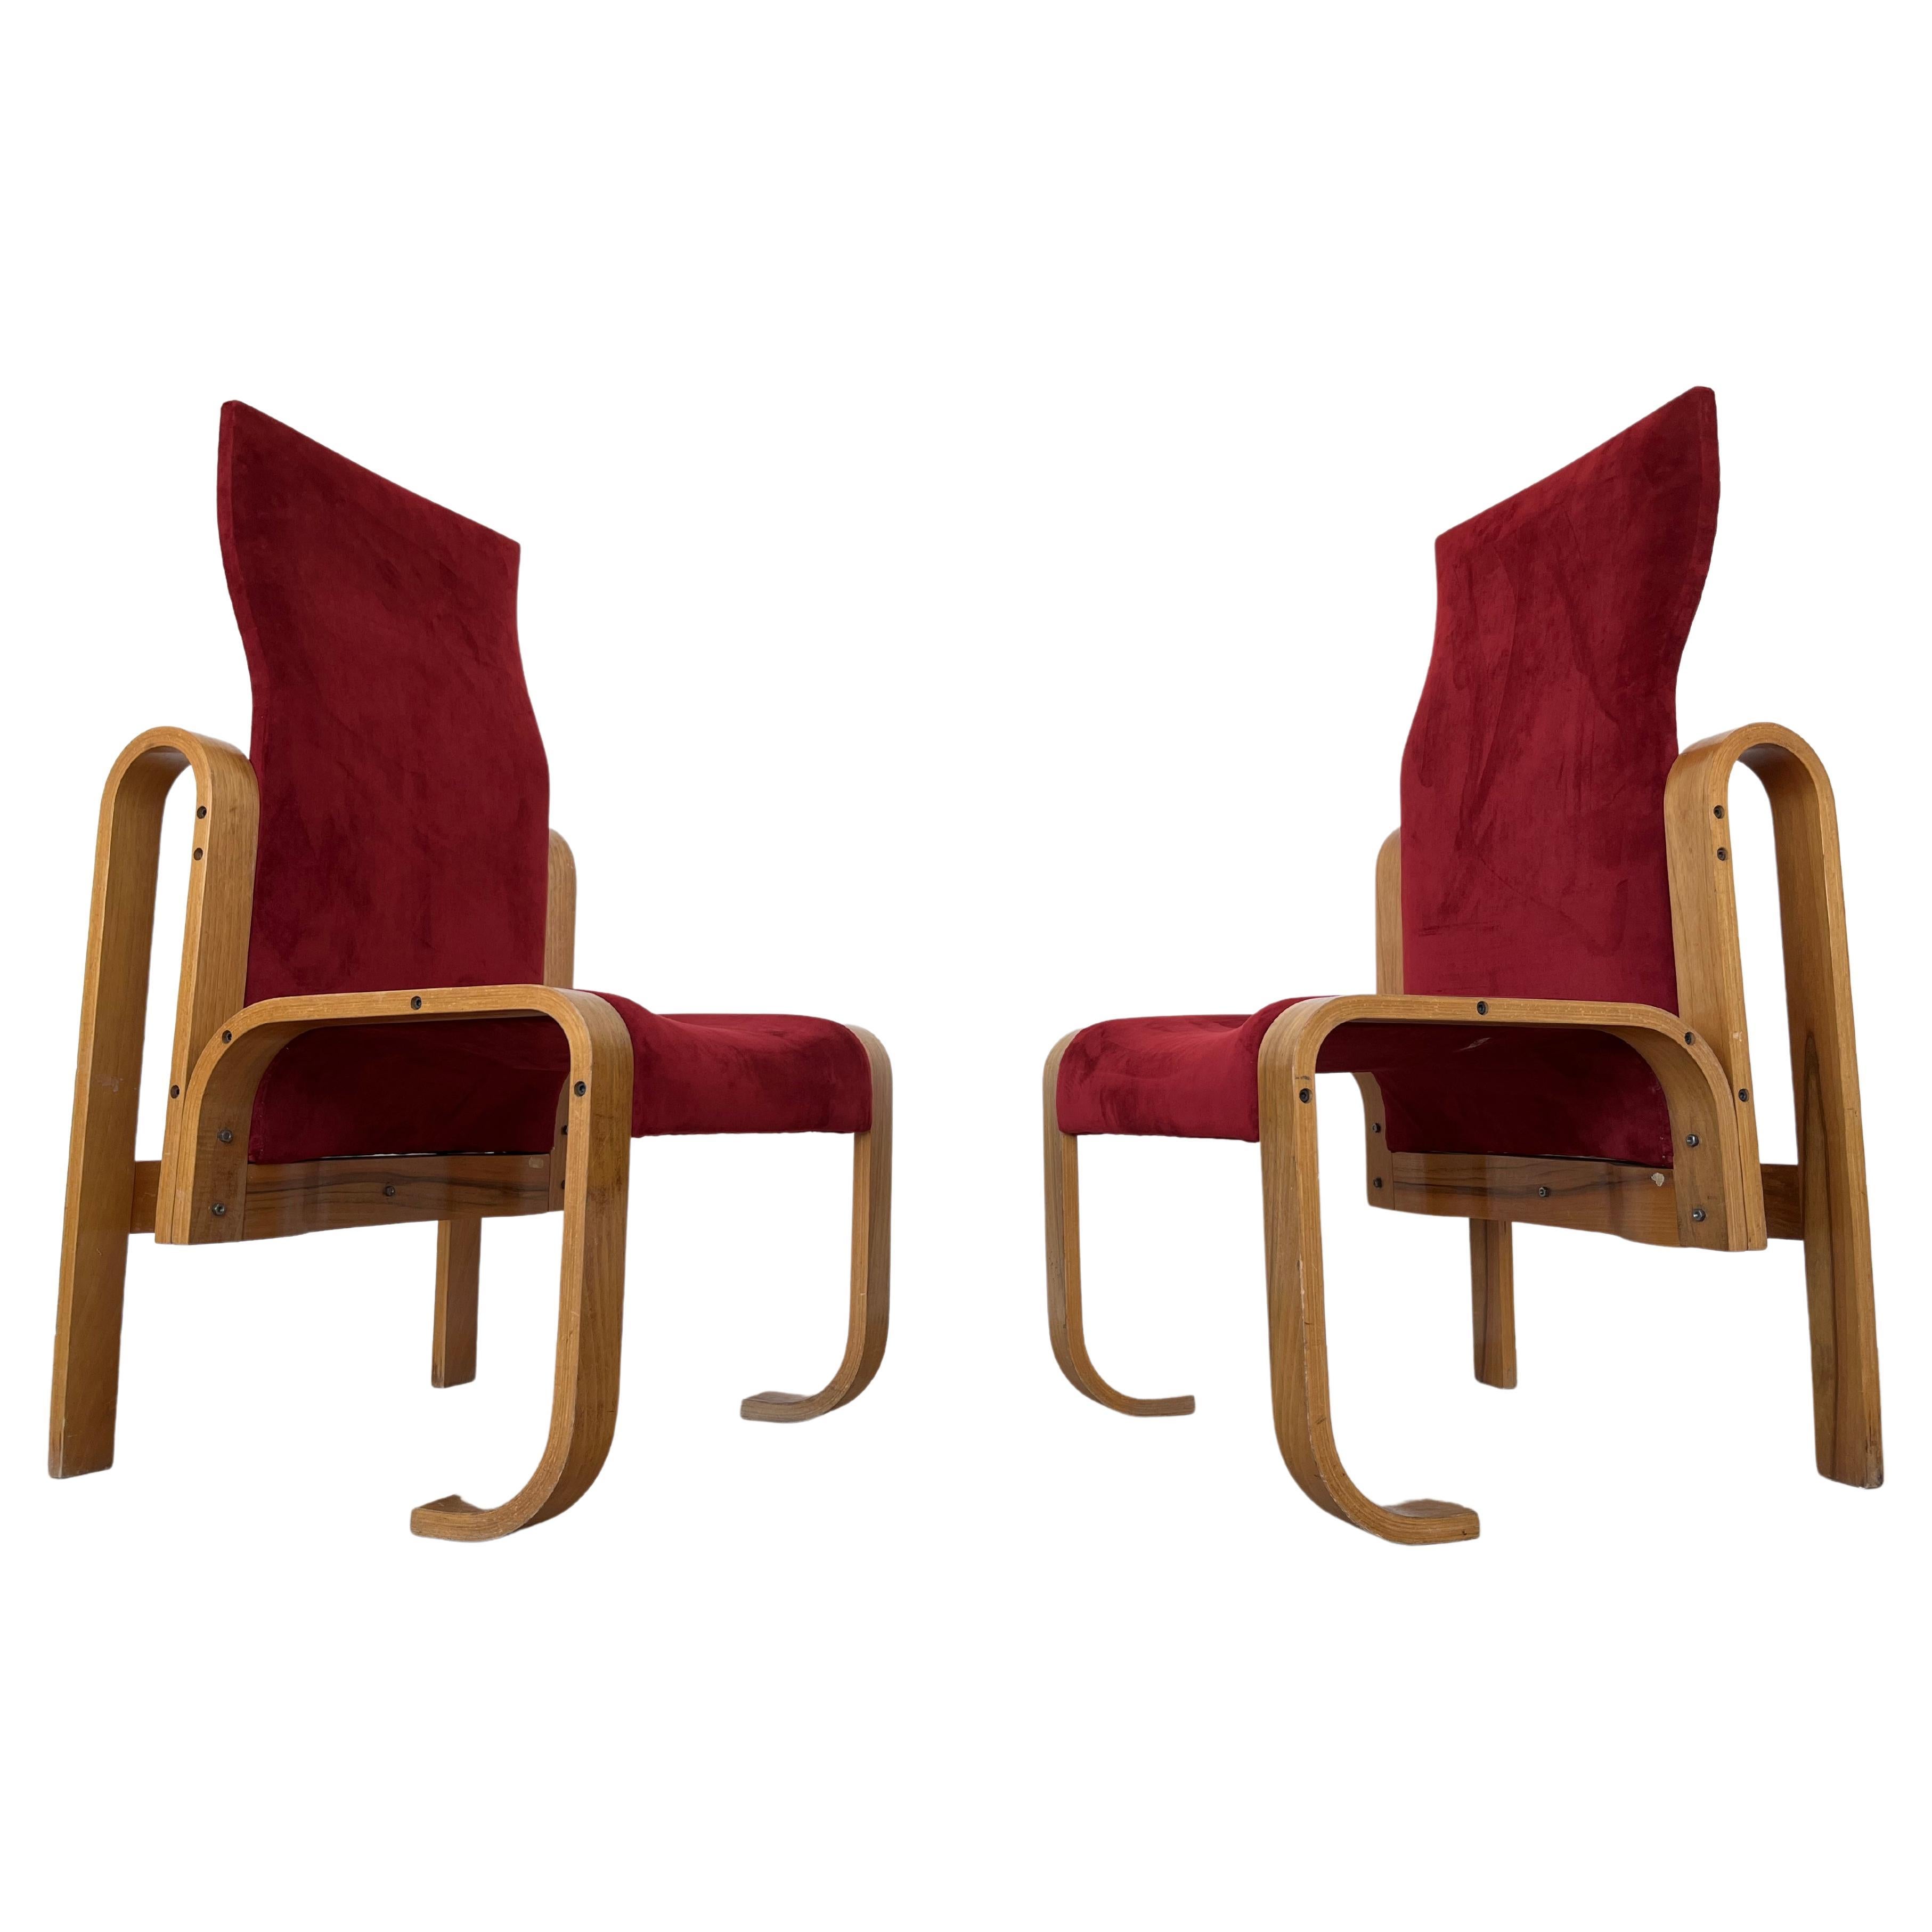 Rare Chairs by Jan Bočan for the Czechoslovakian Embassy in Stockholm, 1972